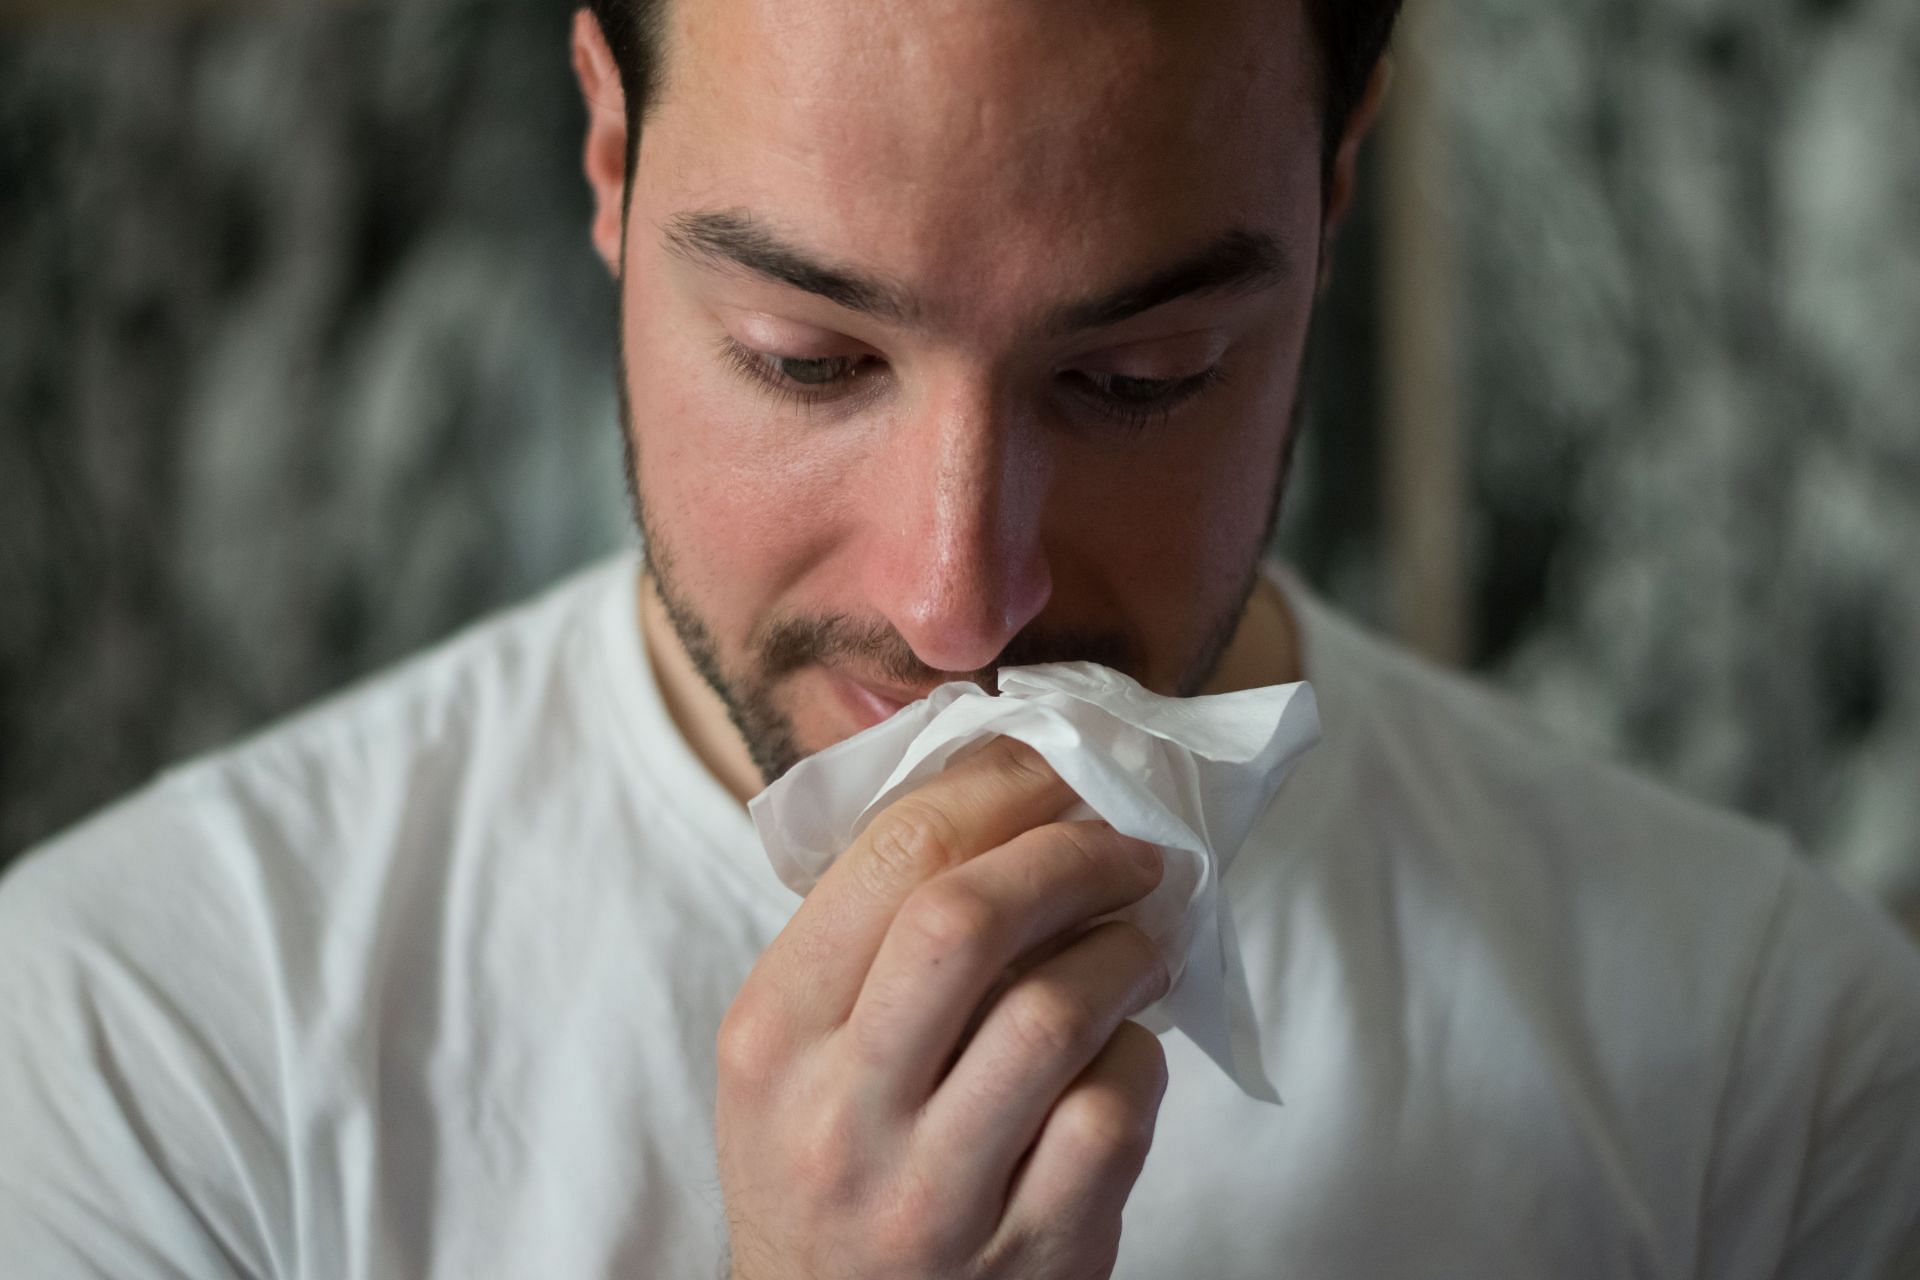 Whooping cough and its severity(Image by Britany Colette/Unsplash)